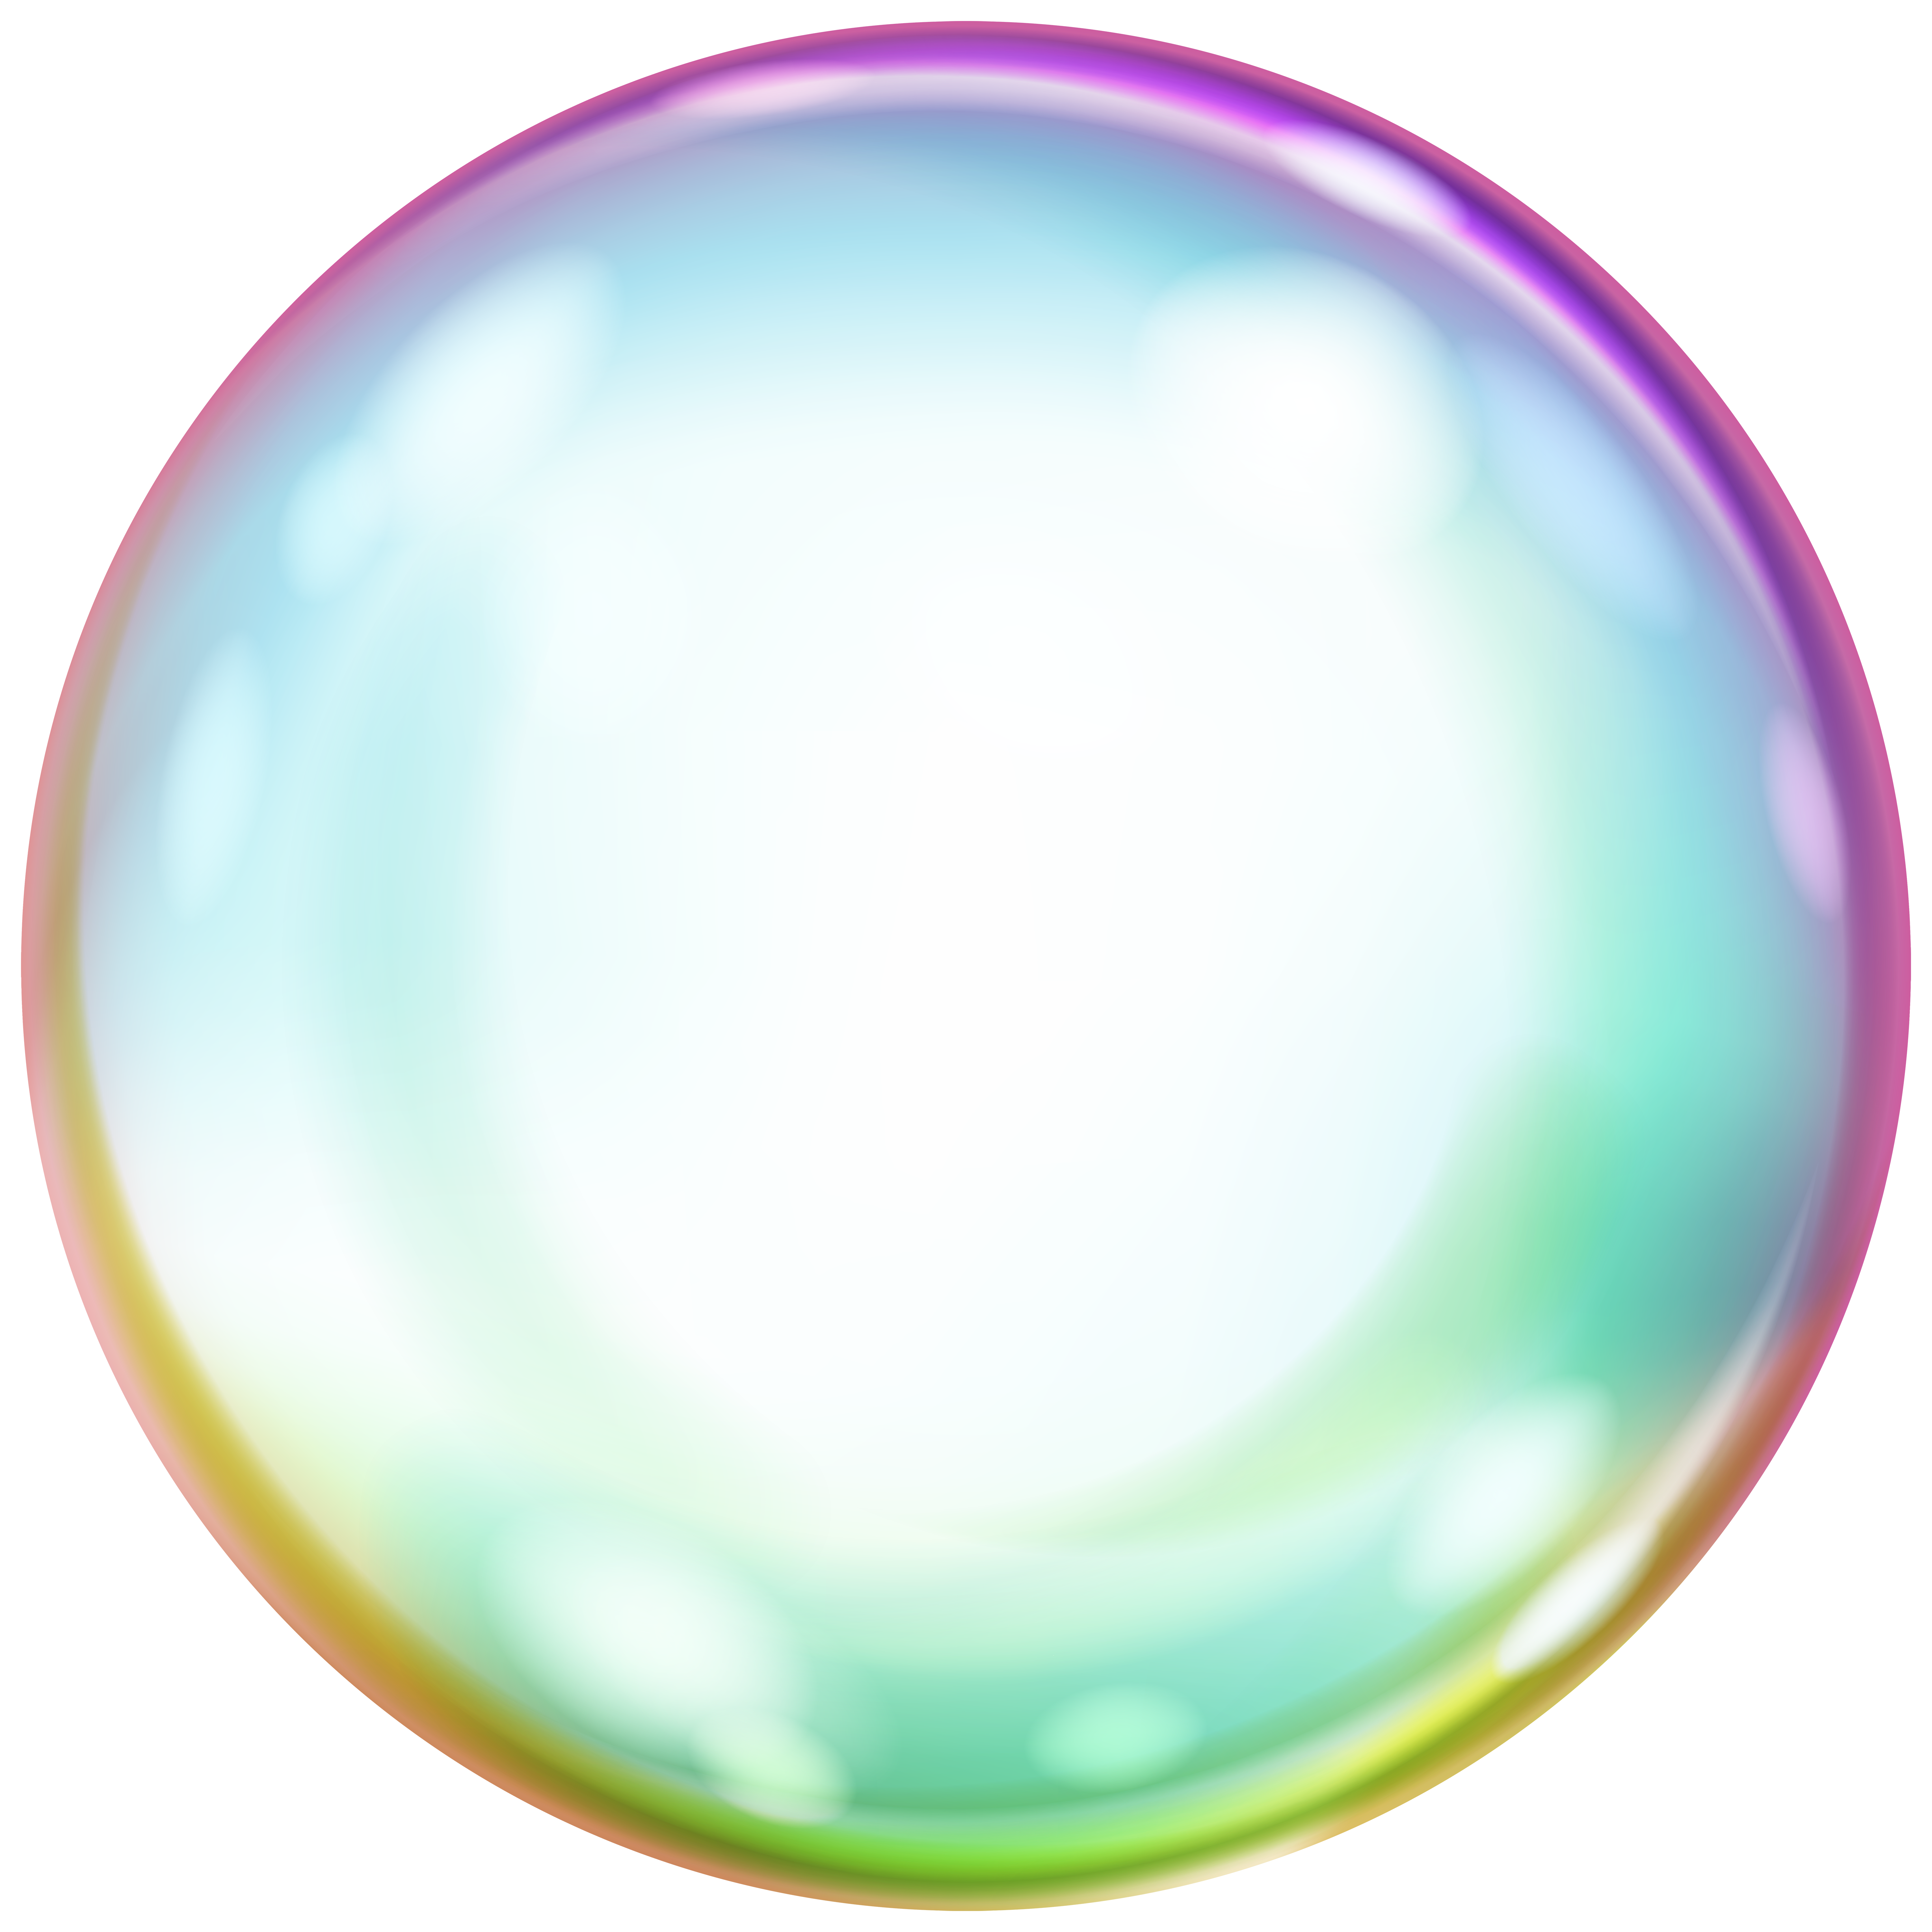 Bubble Sphere Png Clip Art Image Gallery Yopriceville High Quality Images And Transparent Png Free Clipart